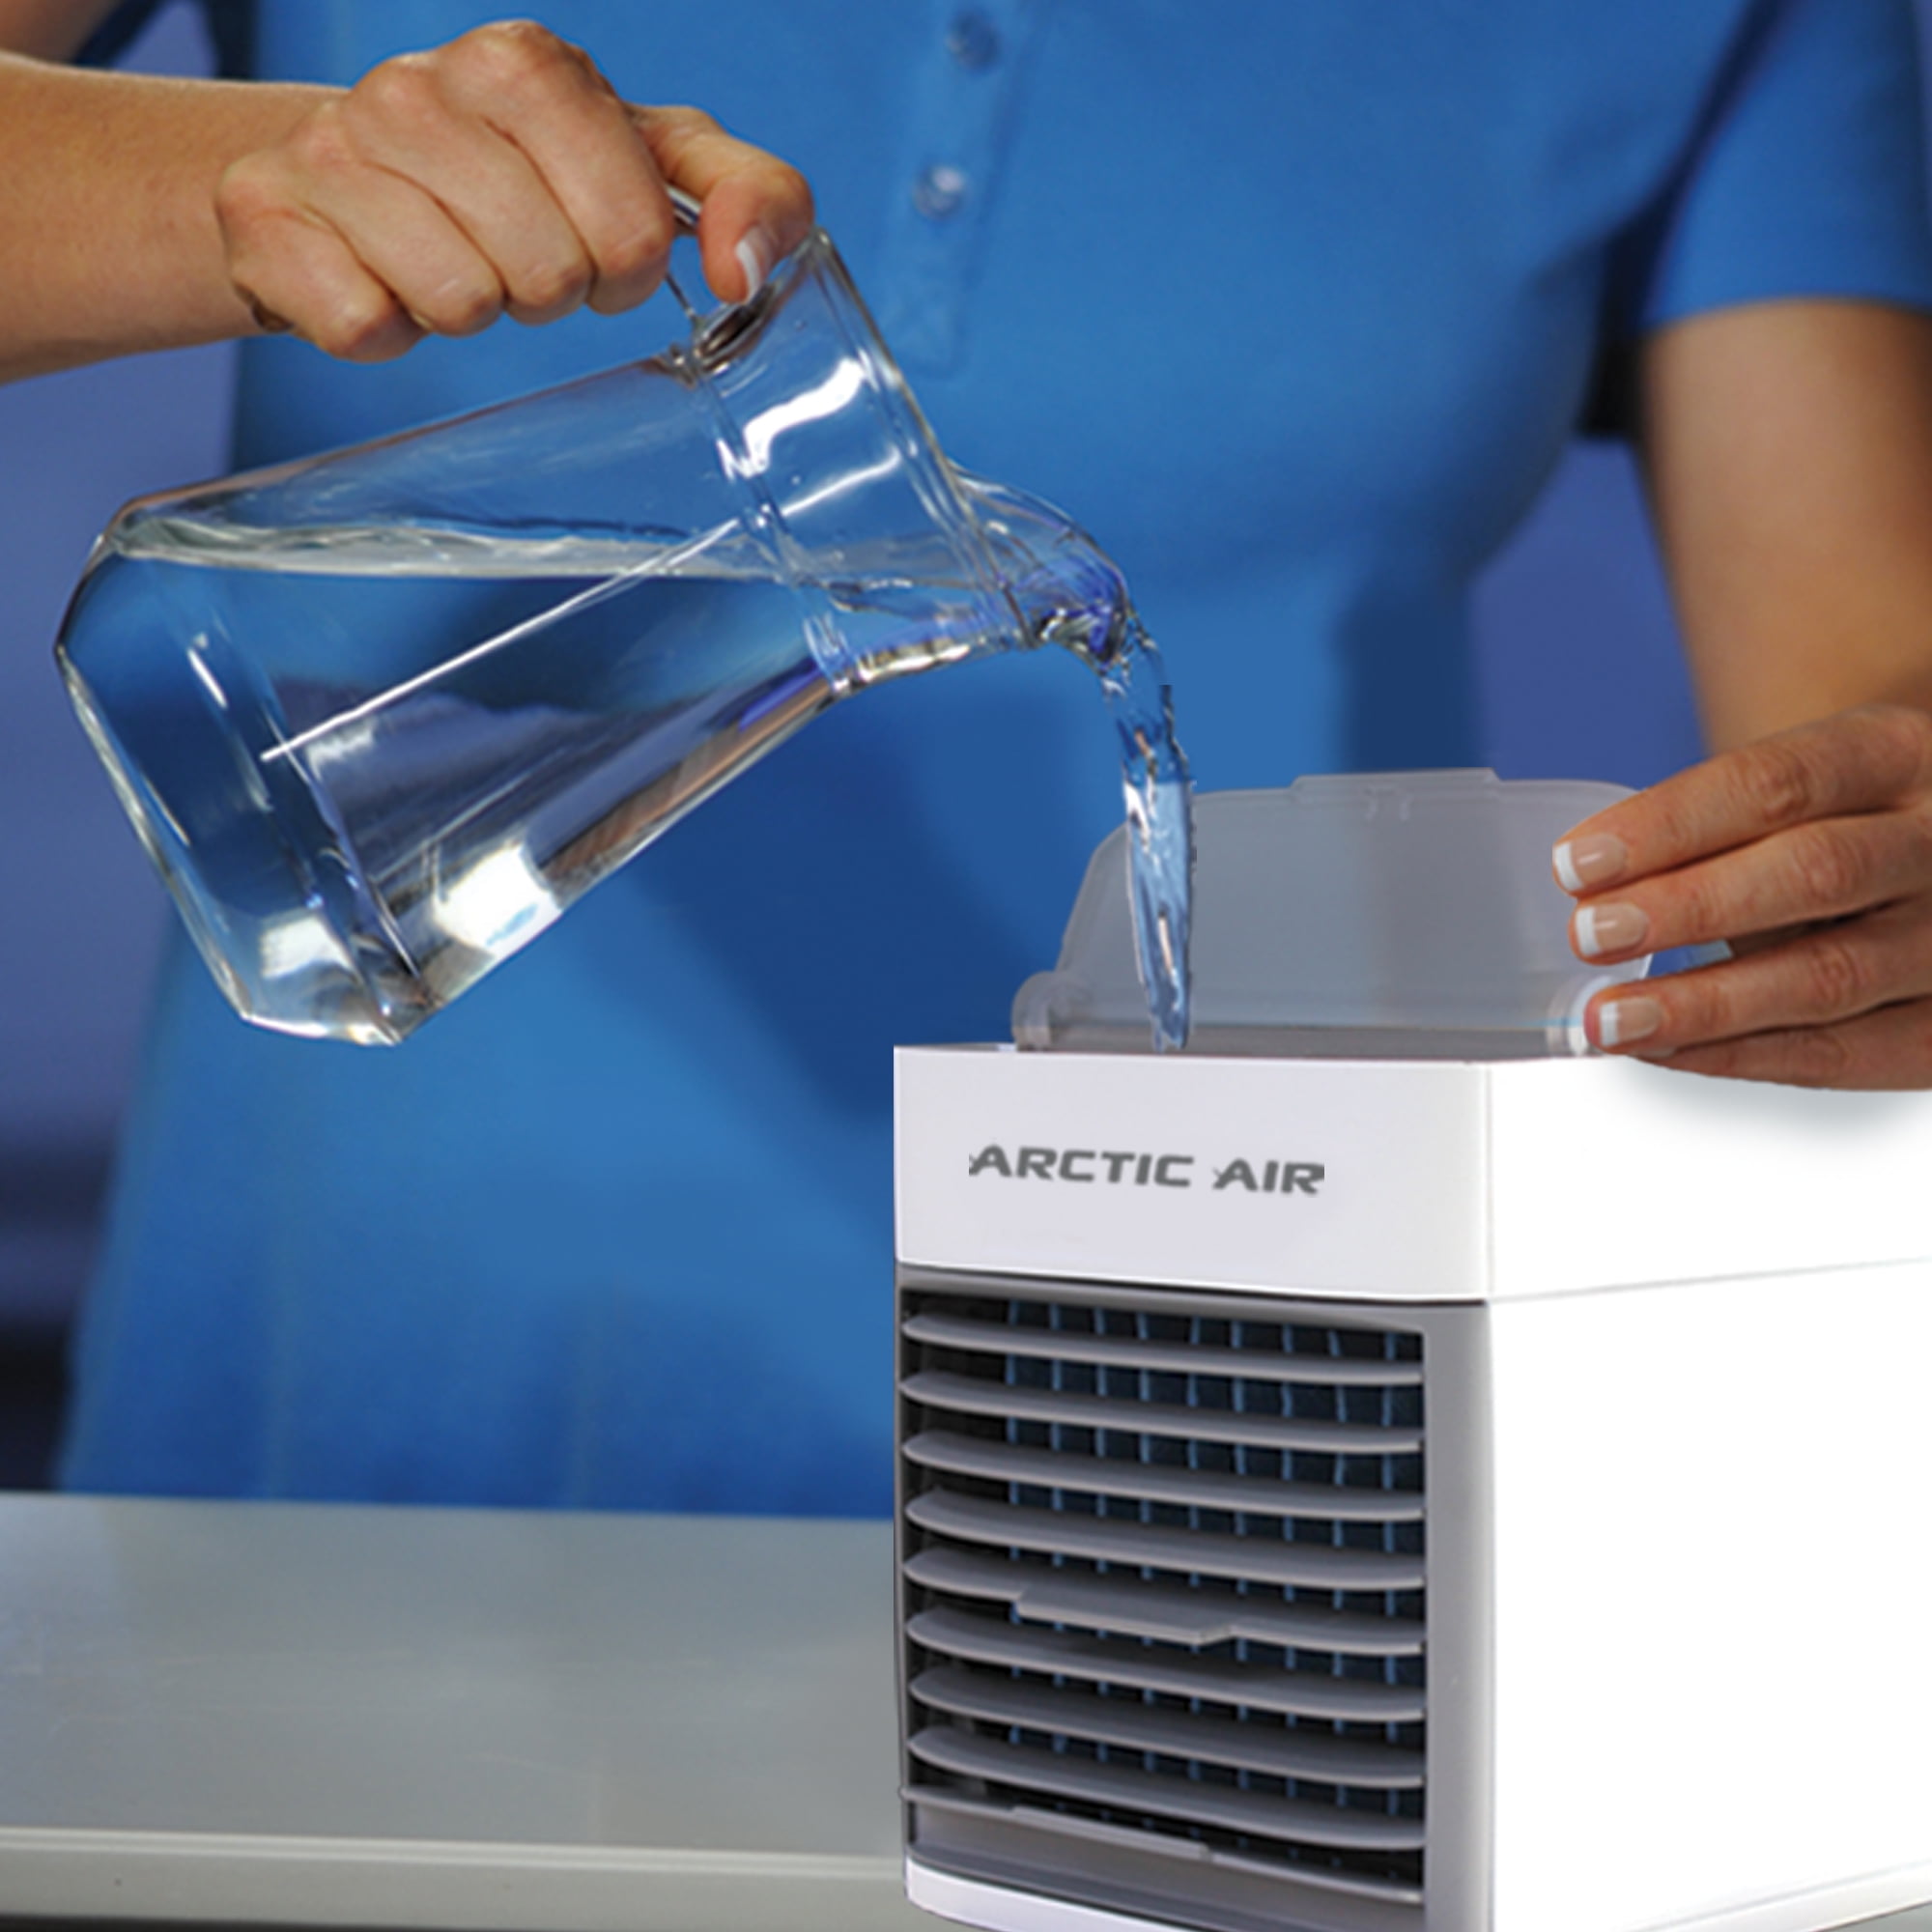 Arctic Air Ultra Portable in Home Air Cooler as Seen on TV